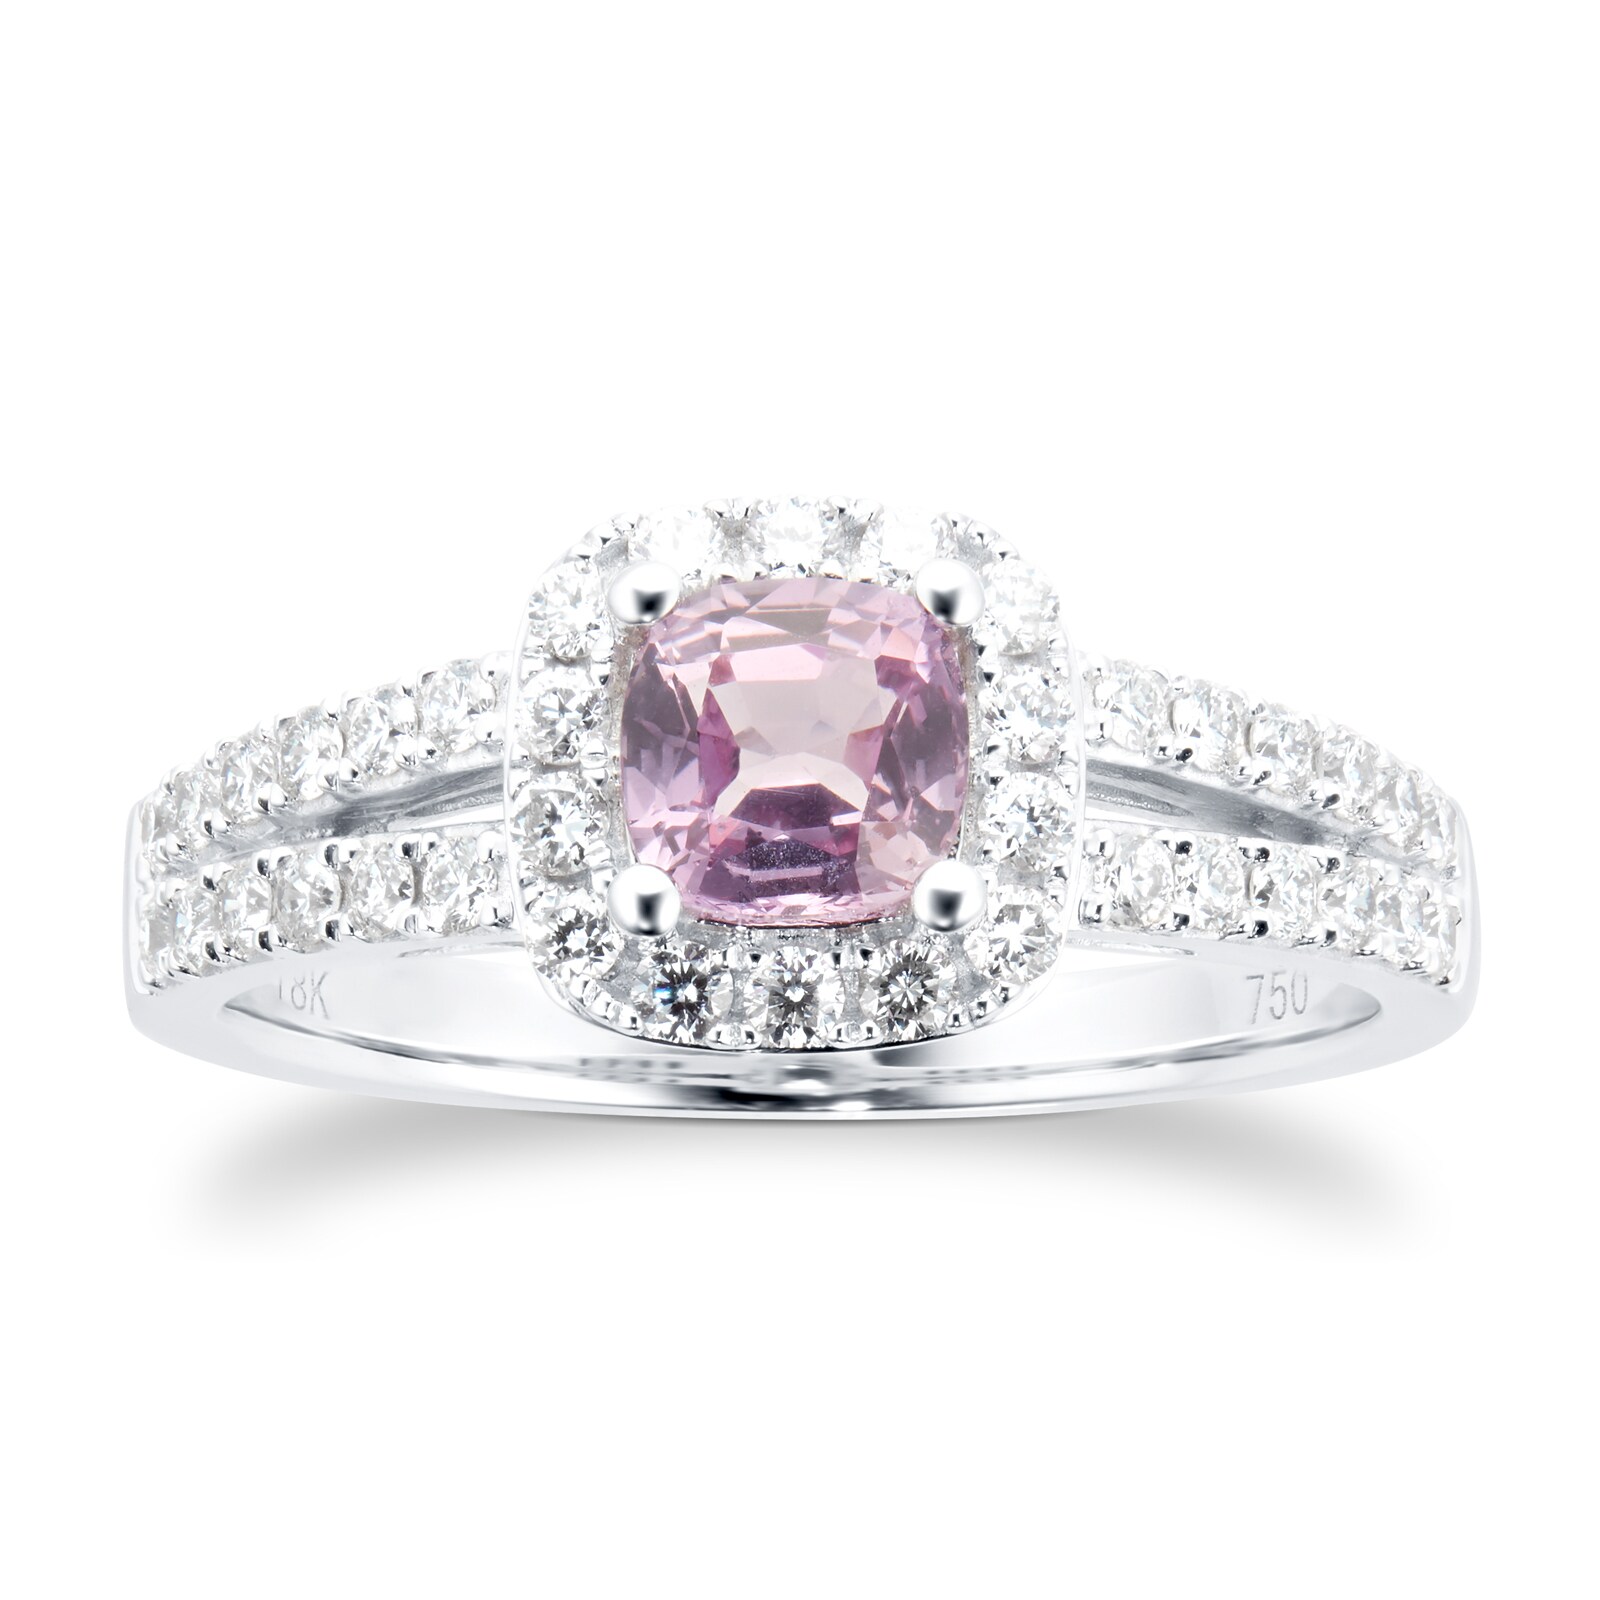 18ct White Gold Pink Sapphire & 0.46cttw Diamond Cushion Cut Halo Ring - Ring Size O